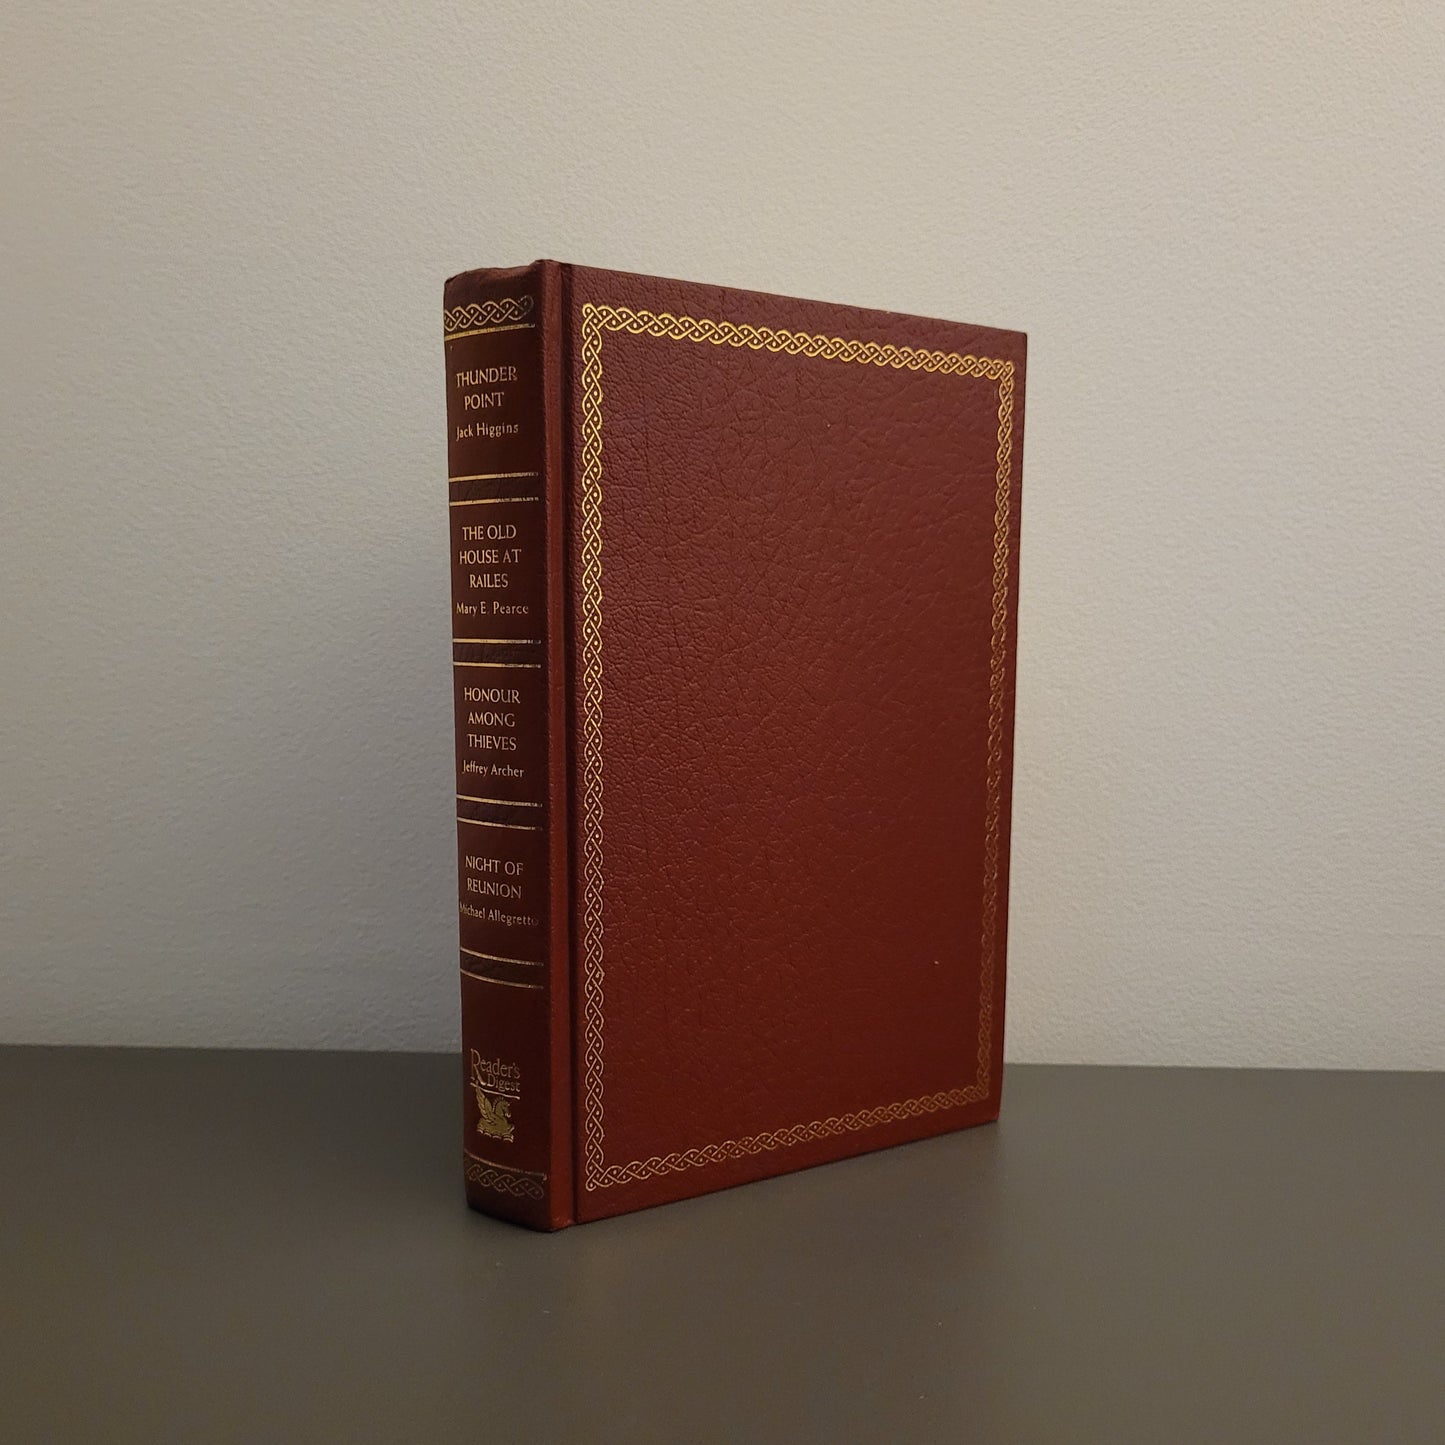 A picture of the front of the book fold - a hardback book with a gold border.